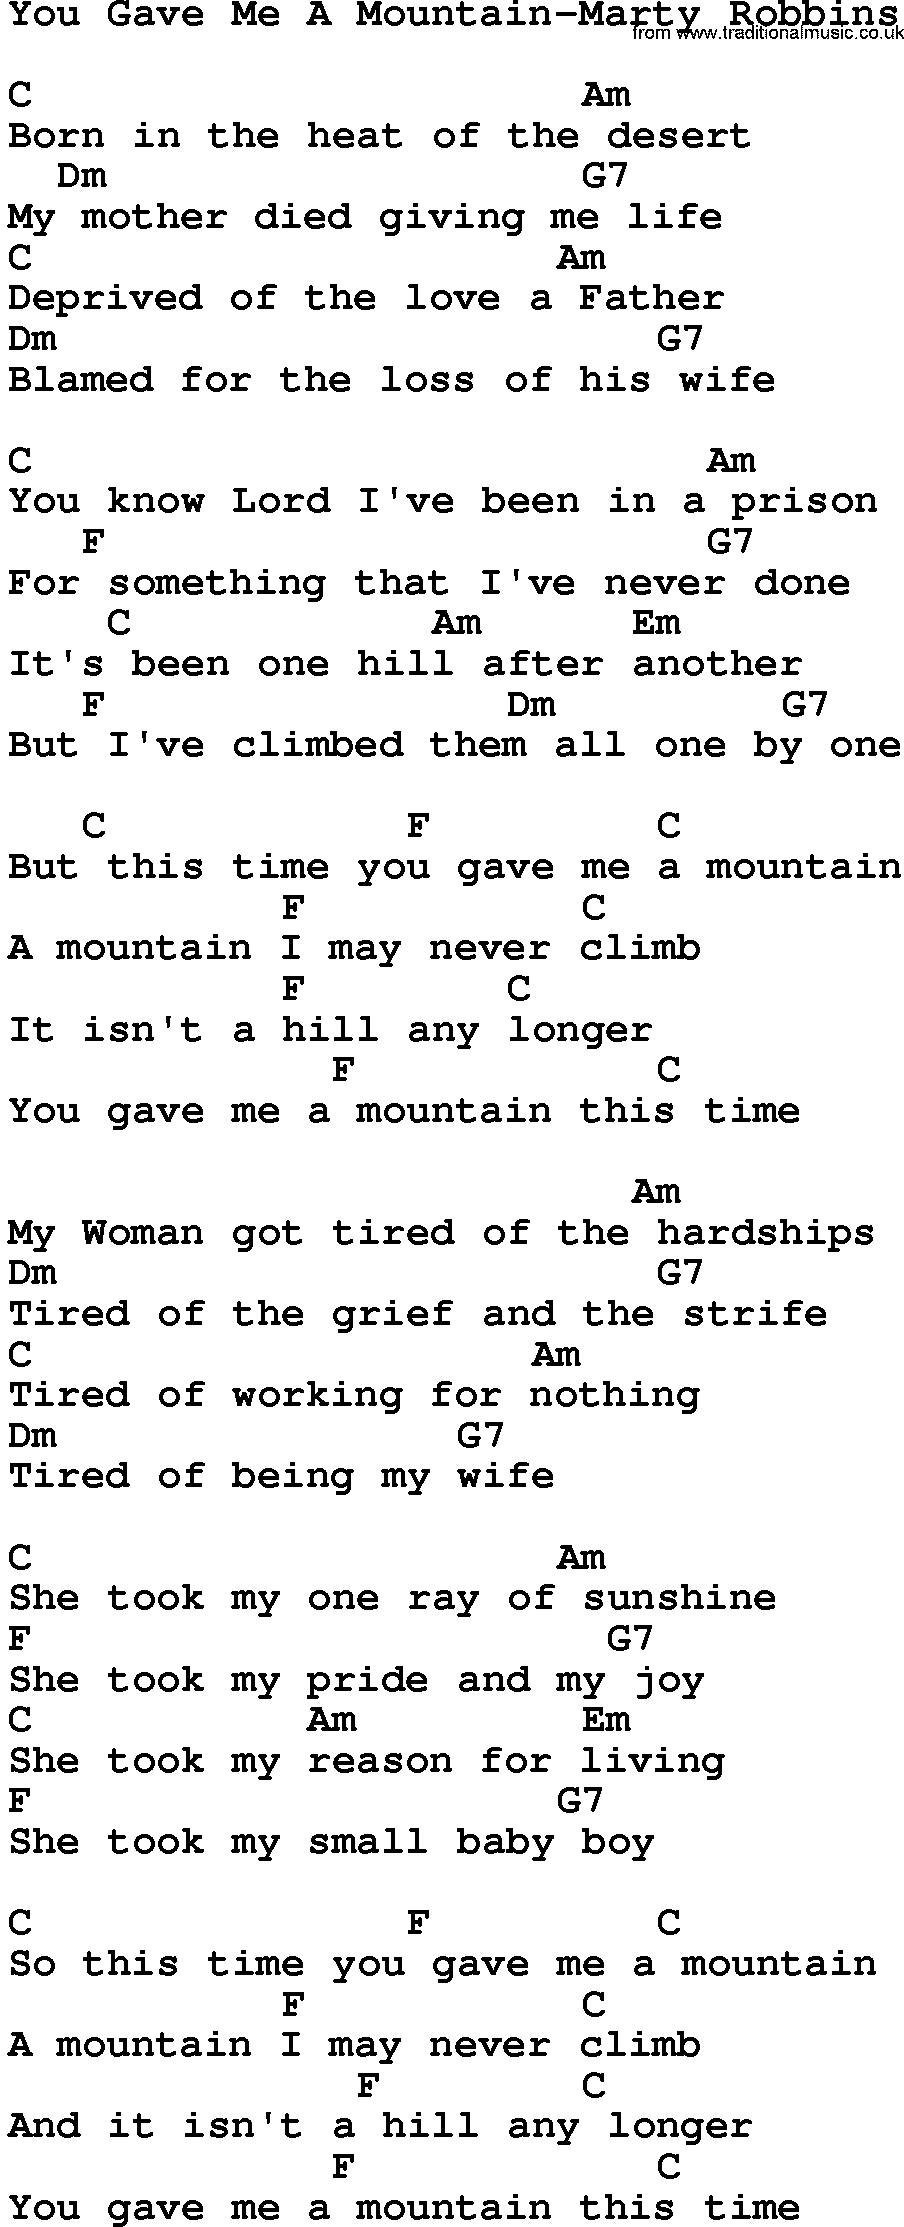 Country music song: You Gave Me A Mountain-Marty Robbins lyrics and chords